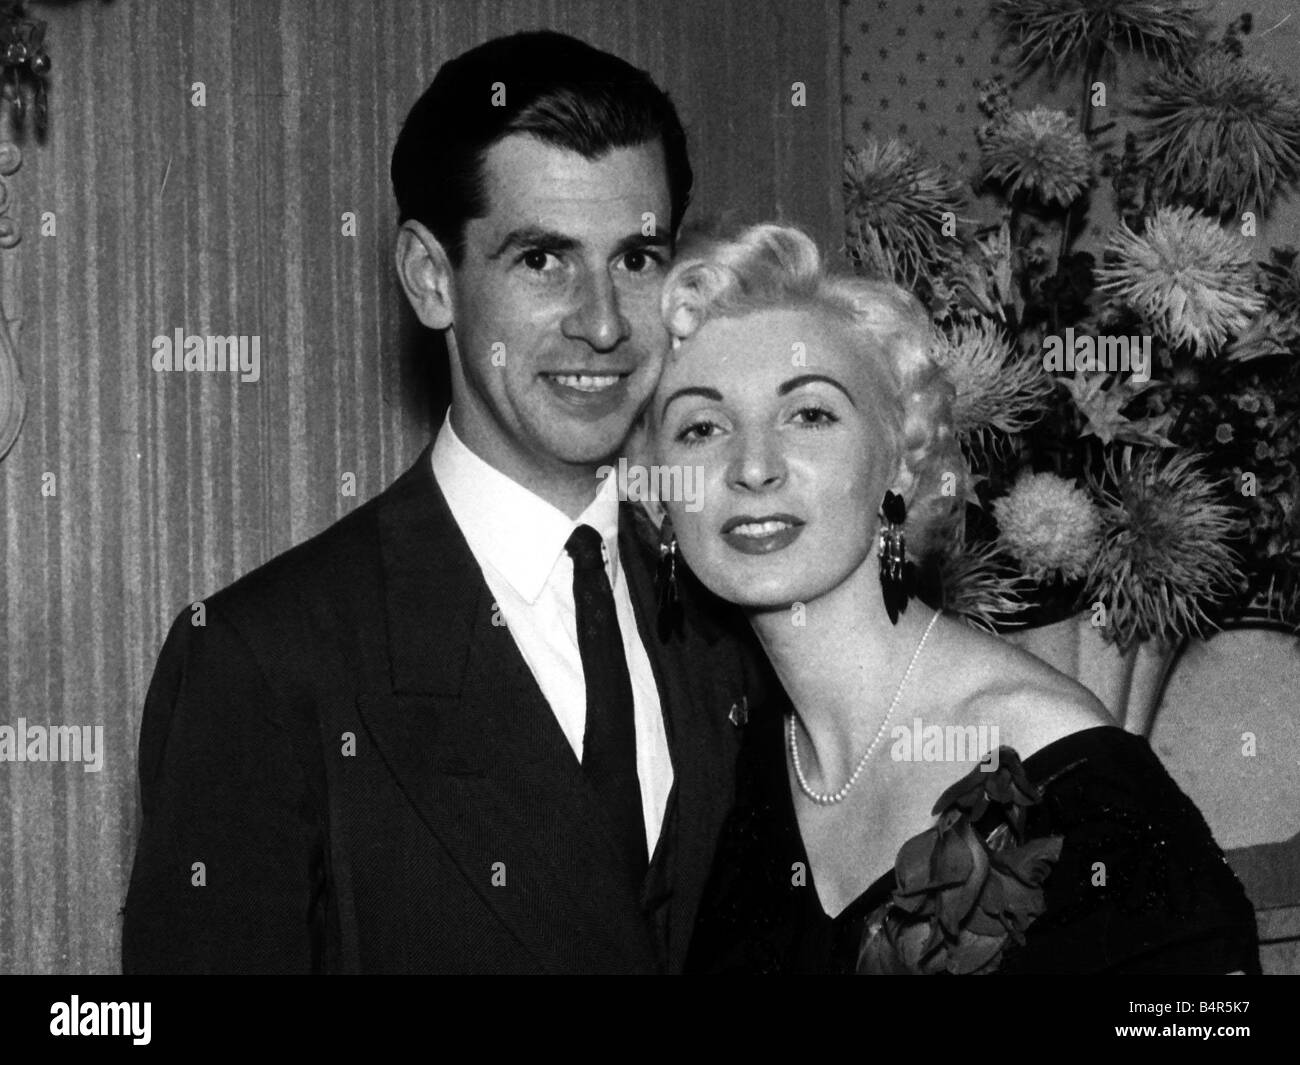 Anniversary 13th July 1955 Nightclub hostess Ruth Ellis becomes last woman to be hanged in Britain executed at Holloway Prison for the murder of her lover David Blakely OPS Ruth Ellis with boyfriend David Blakely at the Little Club in London 1955 Ellis was charged with murder and hanged for the shooting of Blakely at Holloway Prison Stock Photo